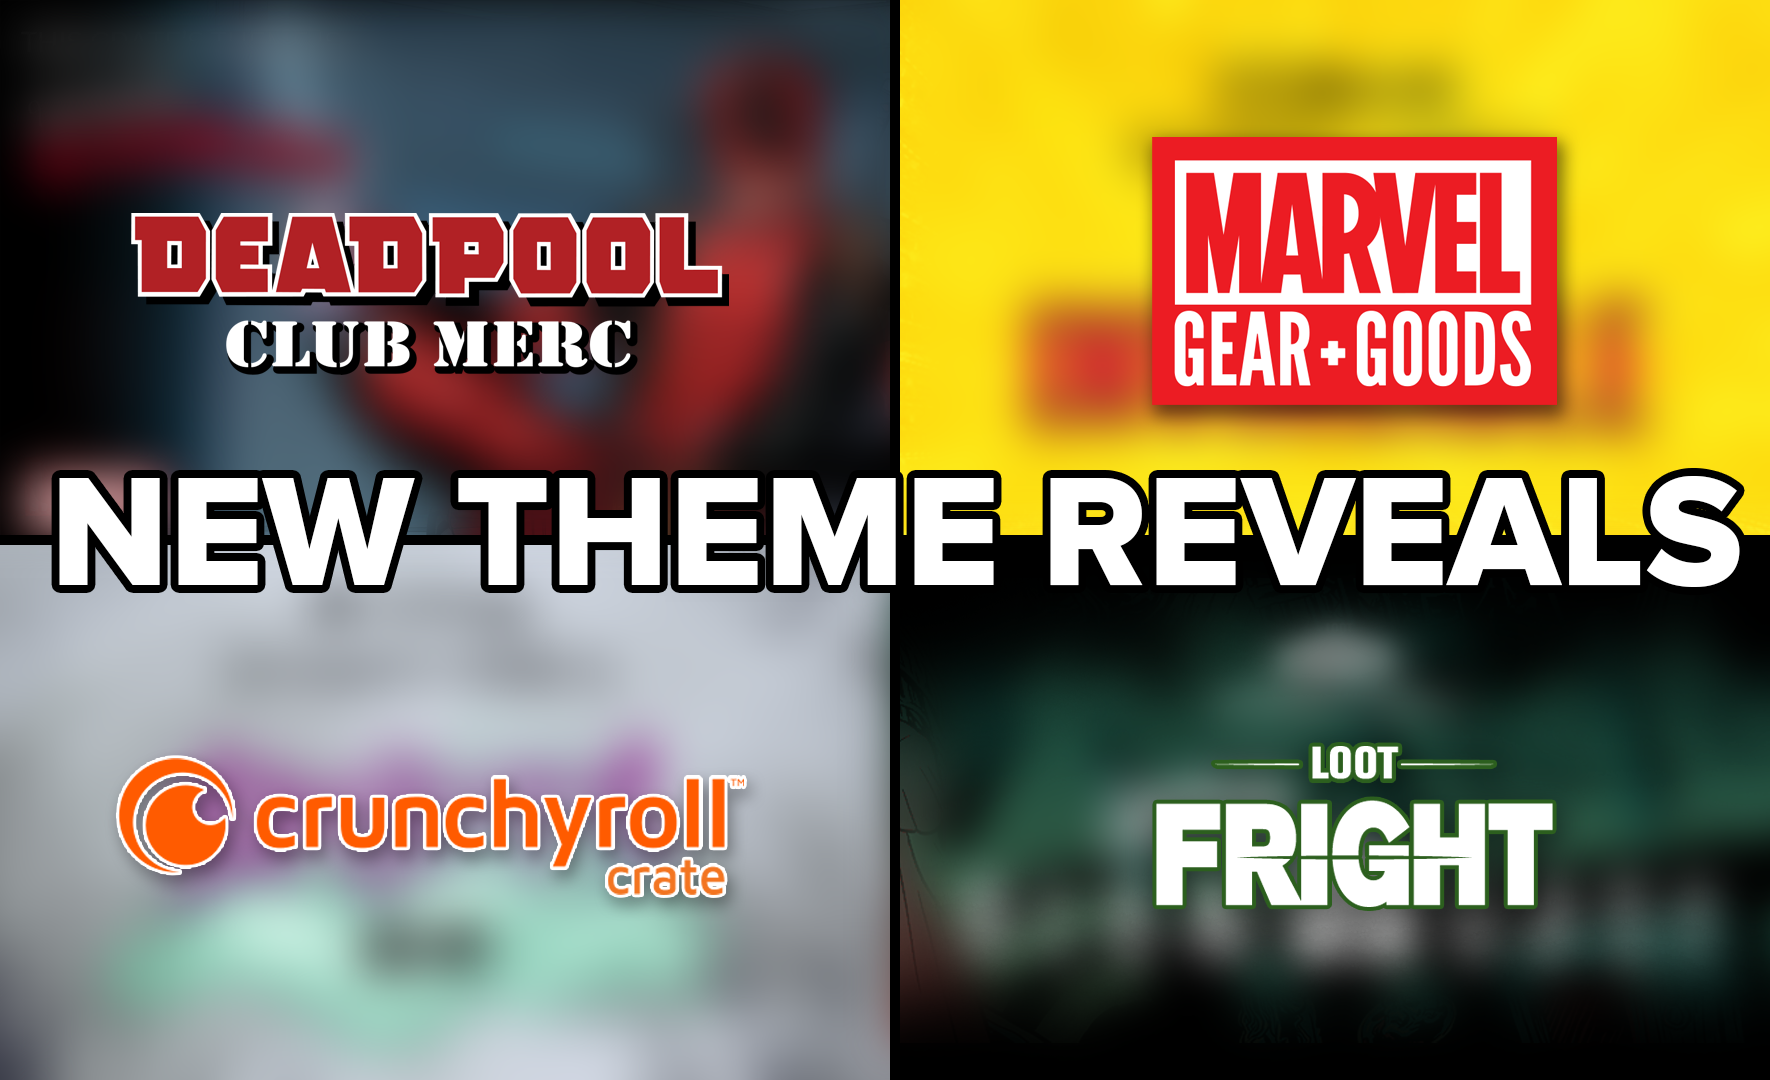 THEME REVEAL: New Marvel, Deadpool, Crunchyroll, and Fright Exclusives!